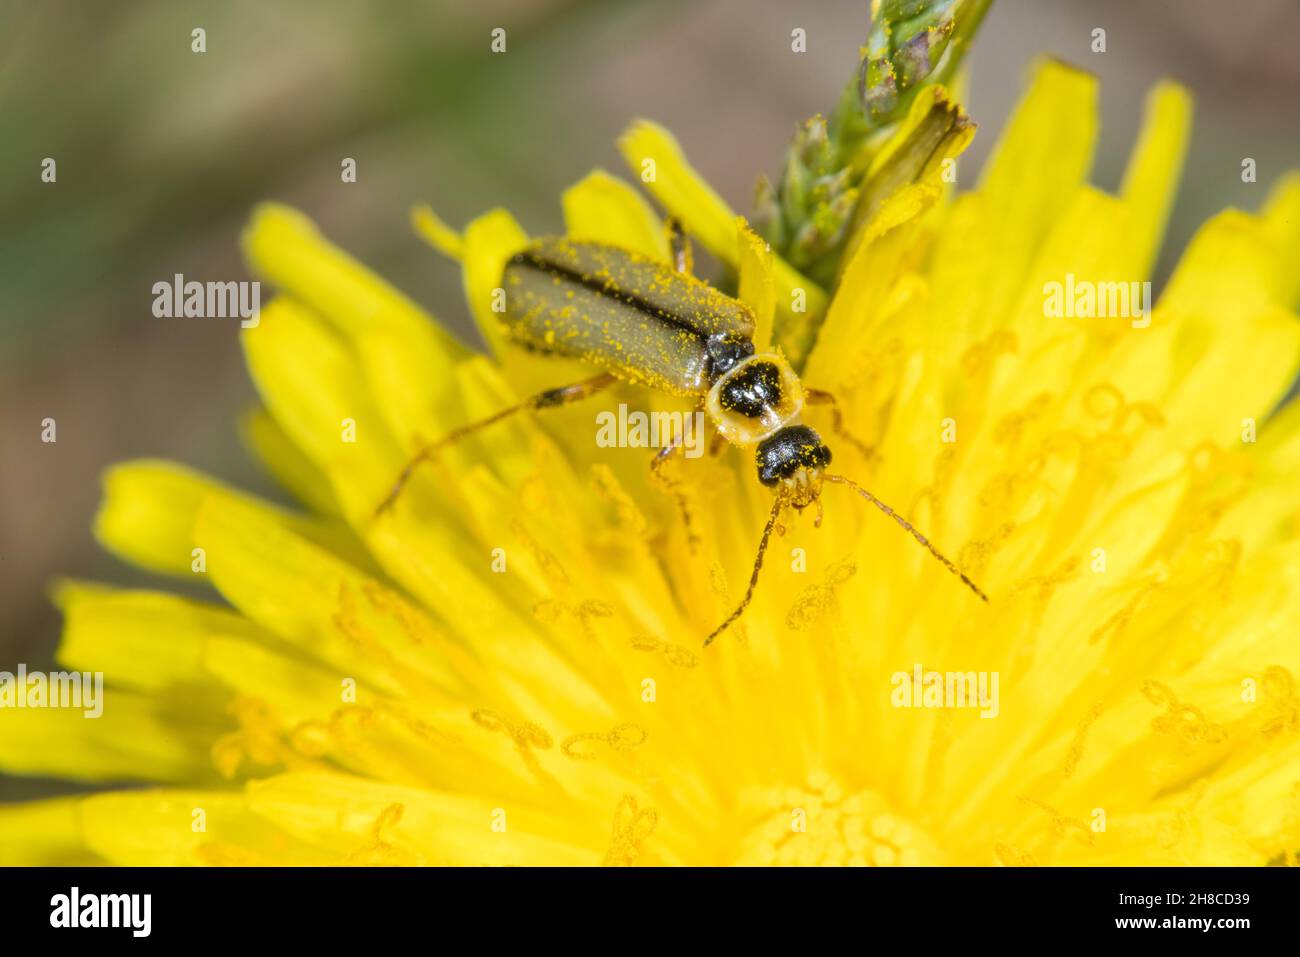 soldier beetle (Metacantharis clypeata), sitting on a yellow composite, Germany Stock Photo